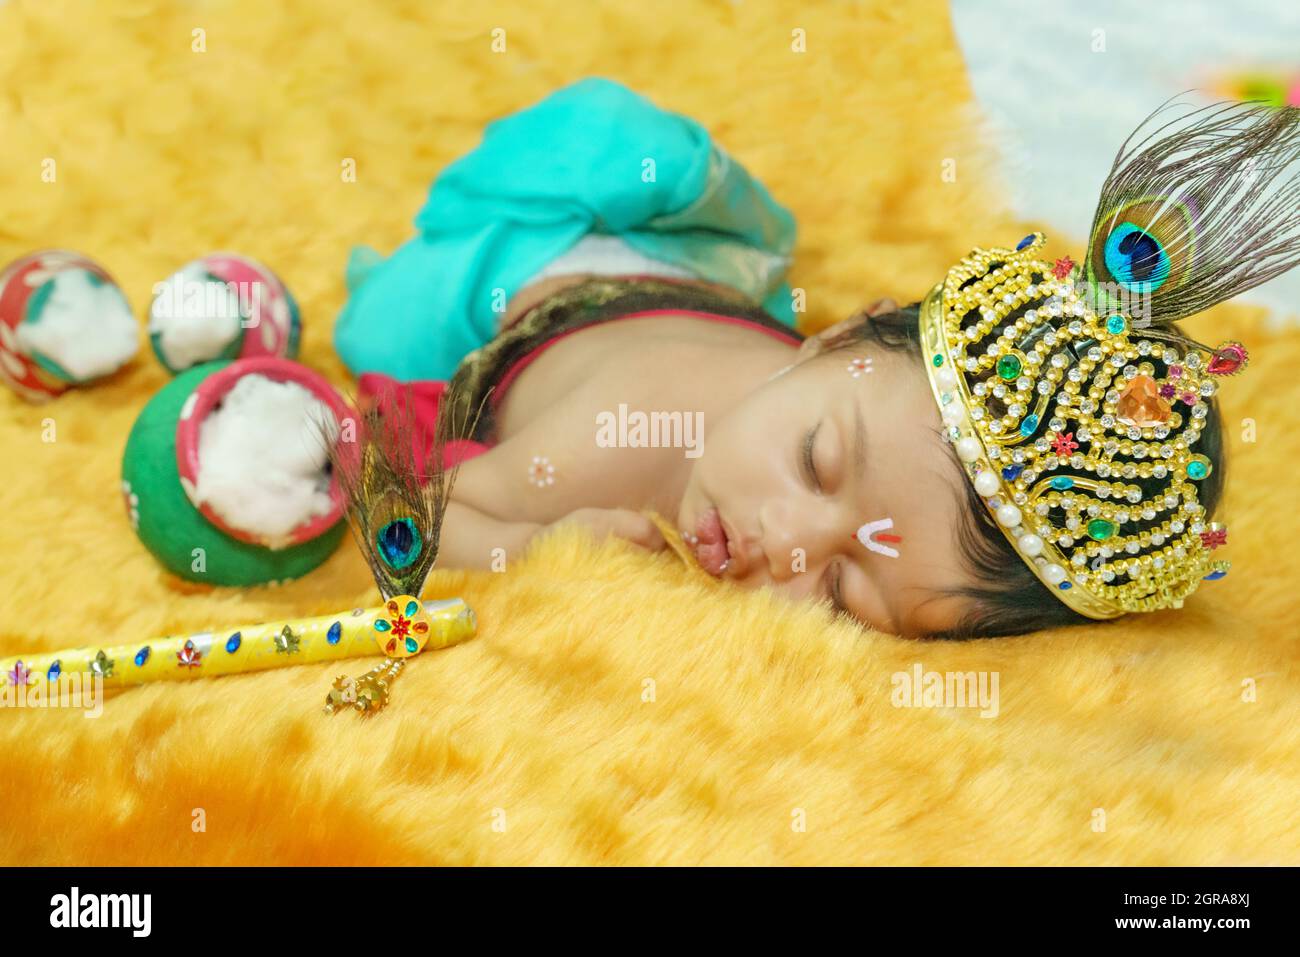 Newborn Baby Sleeping On Bed In An Indian Traditional Attire Stock Photo